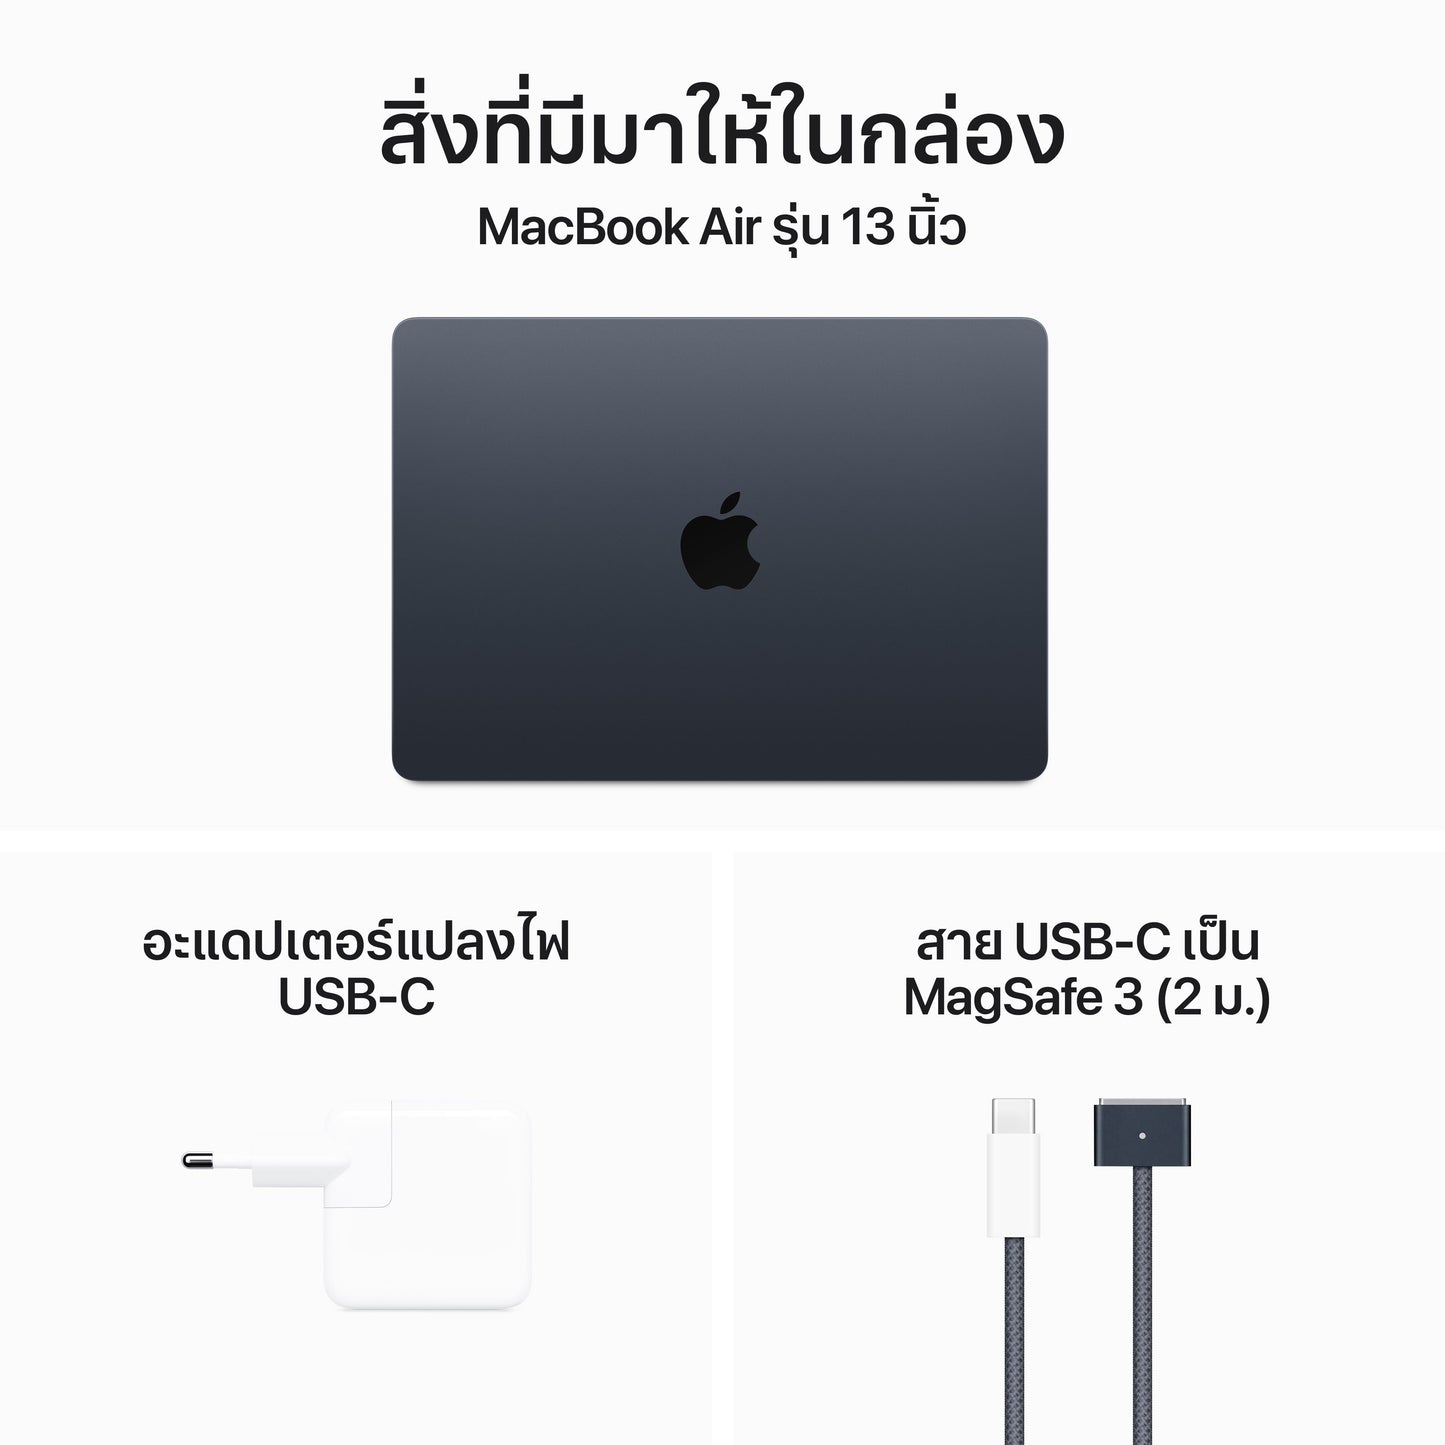 13-inch MacBook Air: Apple M3 chip with 8‑core CPU and 8‑core GPU, 256GB SSD - Midnight